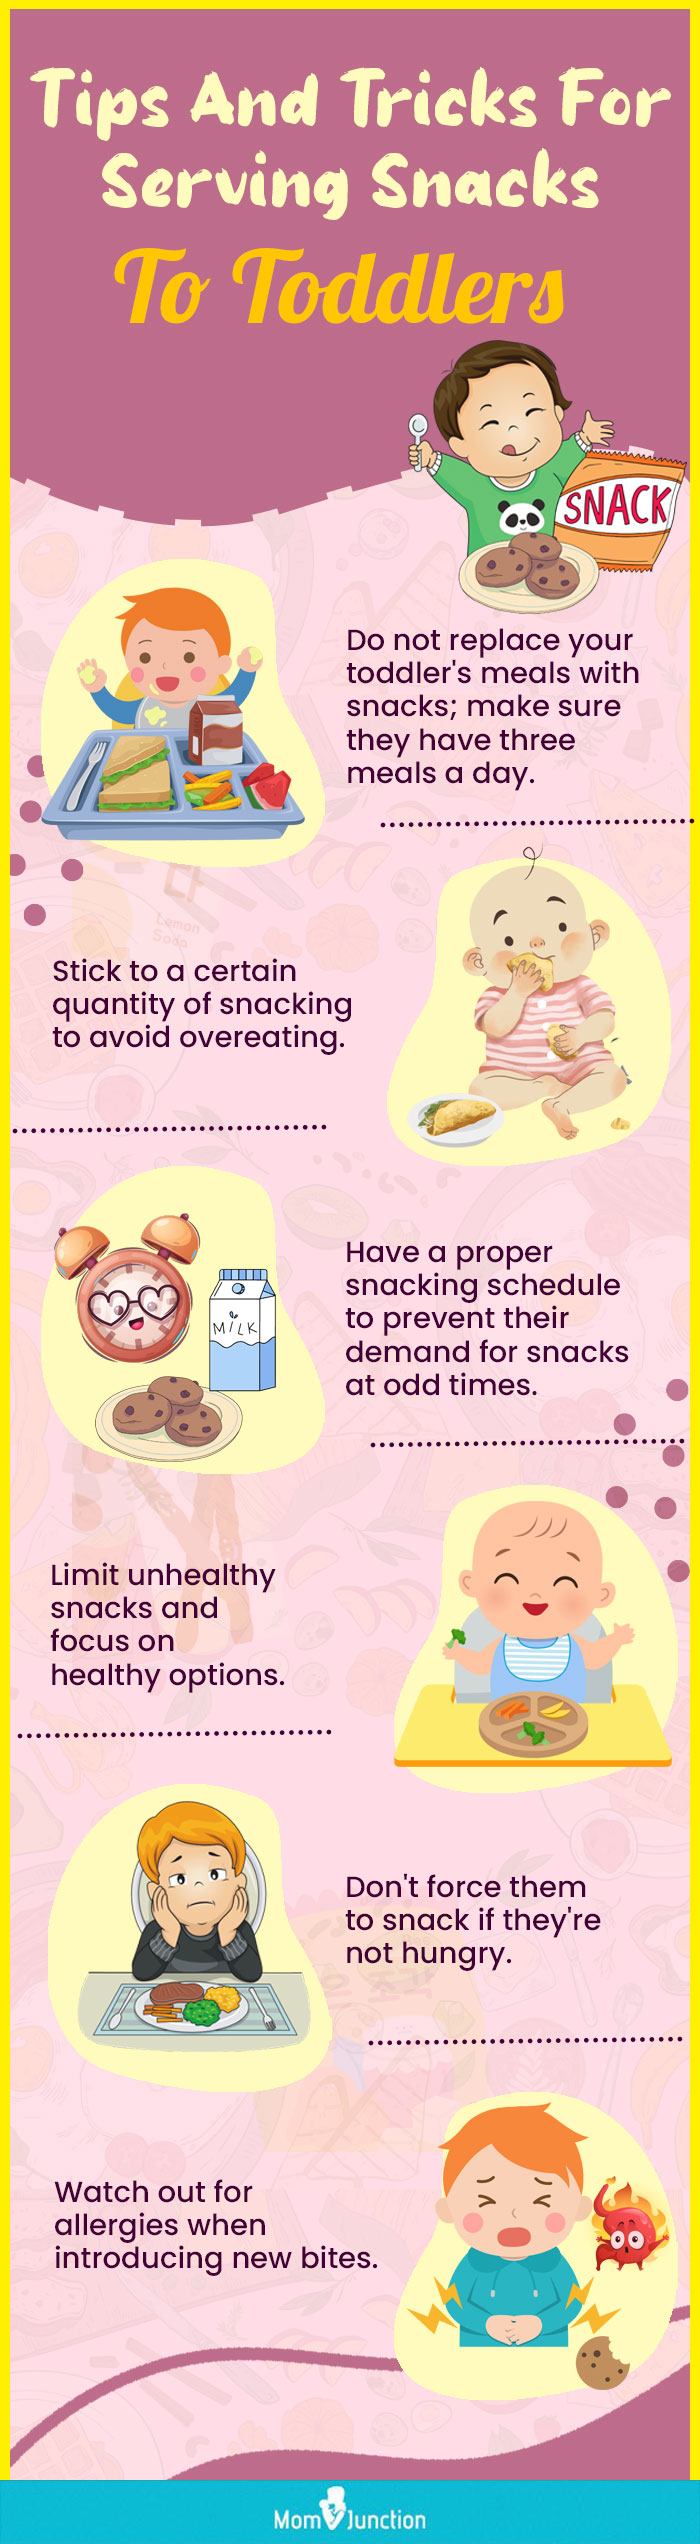 tips and tricks for serving snacks to toddlers (infographic)